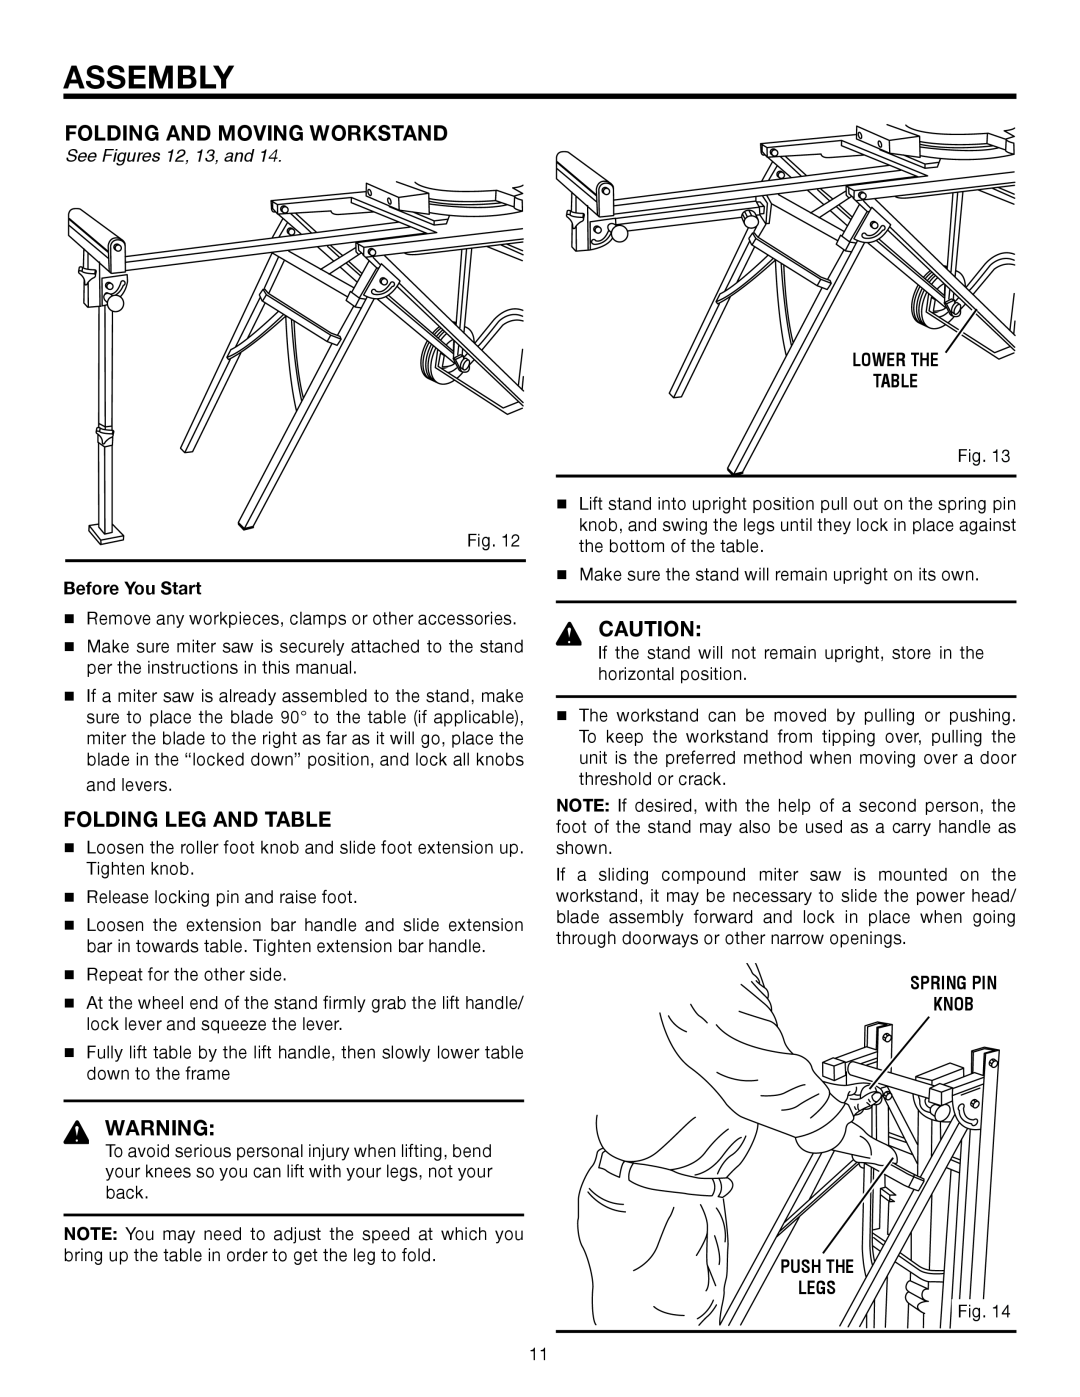 RIDGID AC99402 manual Folding And Moving Workstand, Folding Leg And Table, See Figures 12, 13, and, Lower The, Assembly 